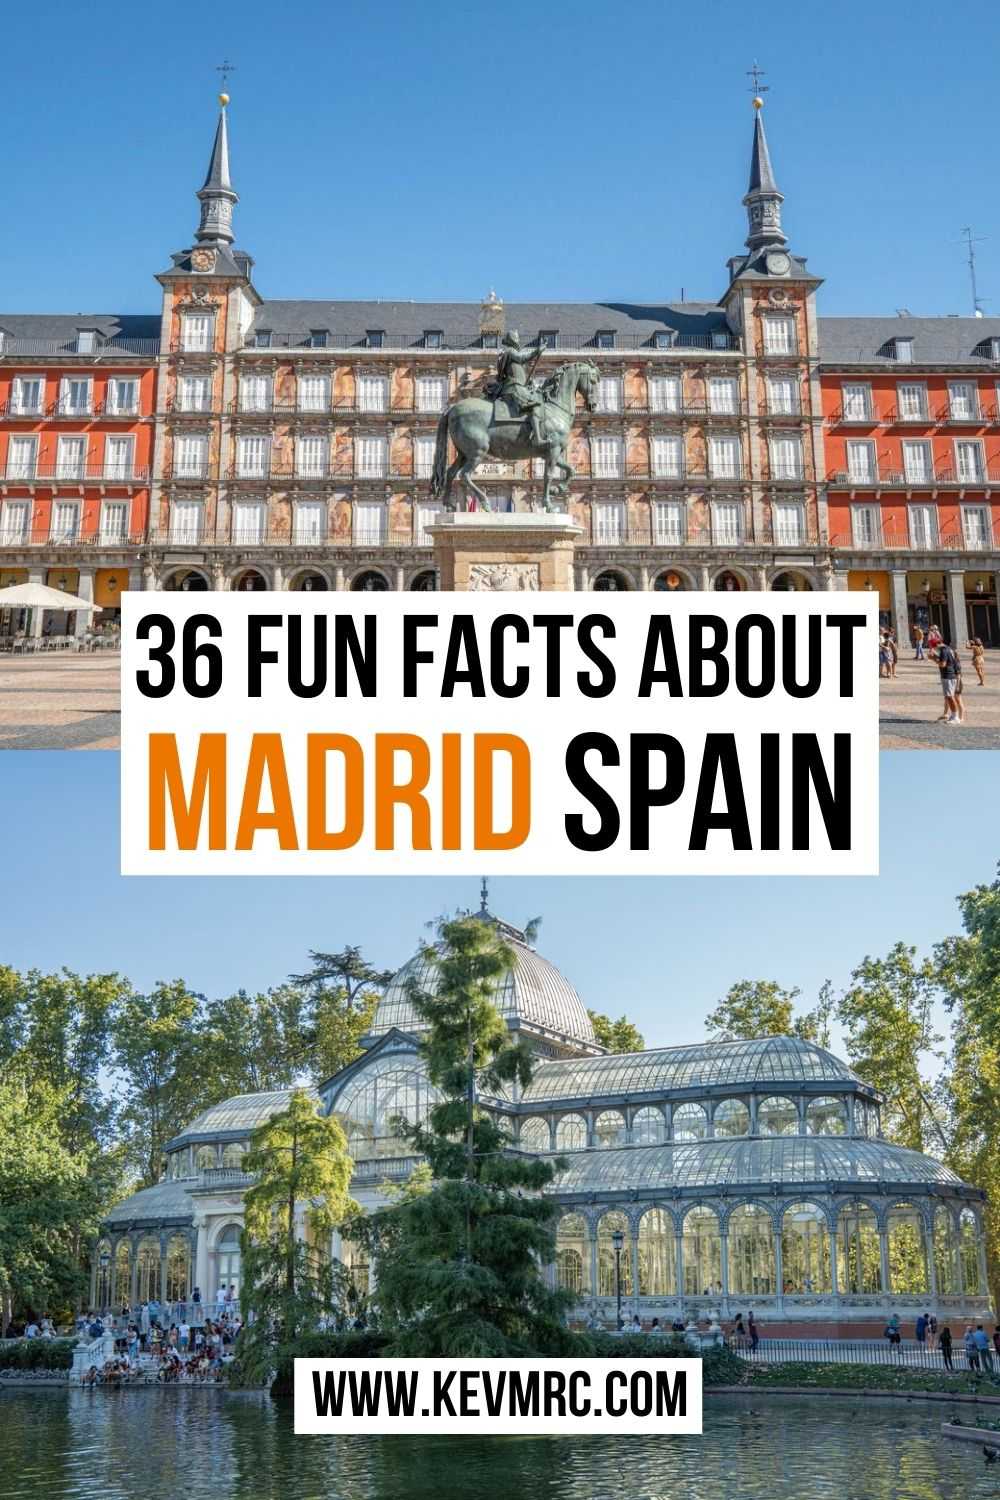 The Spanish capital is a sunny and pleasant city of more than 3 million people. Located in the middle of the Iberian Peninsula, Madrid is the economic and geographical center of the country. All four corners of Spain are in fact reachable in less than 7 hours by car from Madrid! Learn more with these 36 interesting facts about Madrid Spain! madrid spain facts | madrid facts | spain facts fun | fun facts about spain #spainfacts #madrid